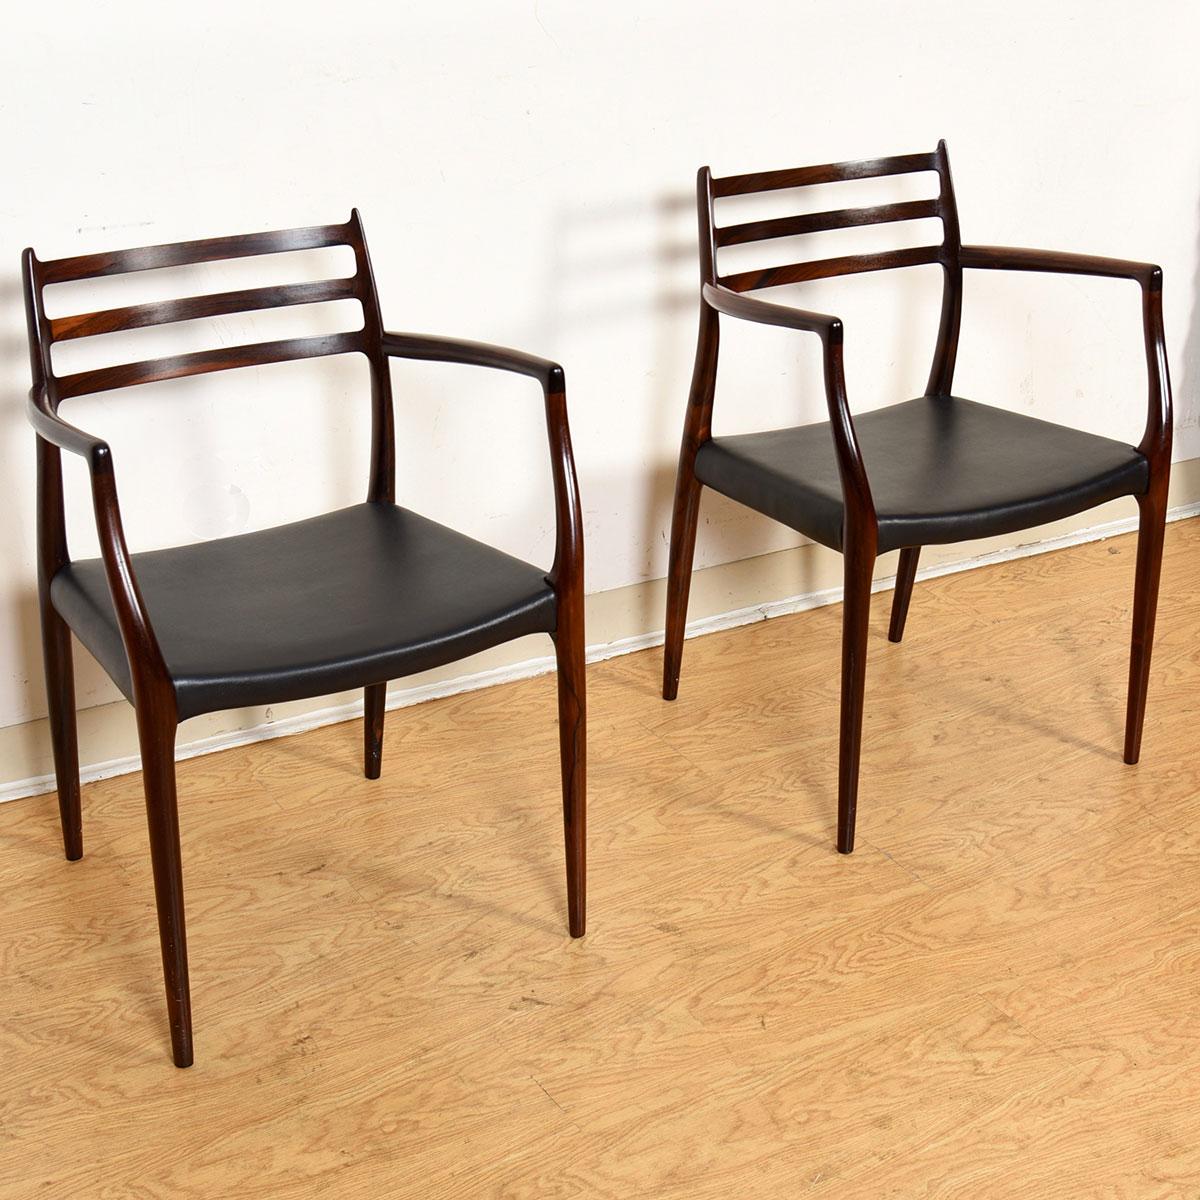 Mid-Century Modern Pair of Moller Danish Horn Arm-Chairs #62 in Brazilian Rosewood For Sale